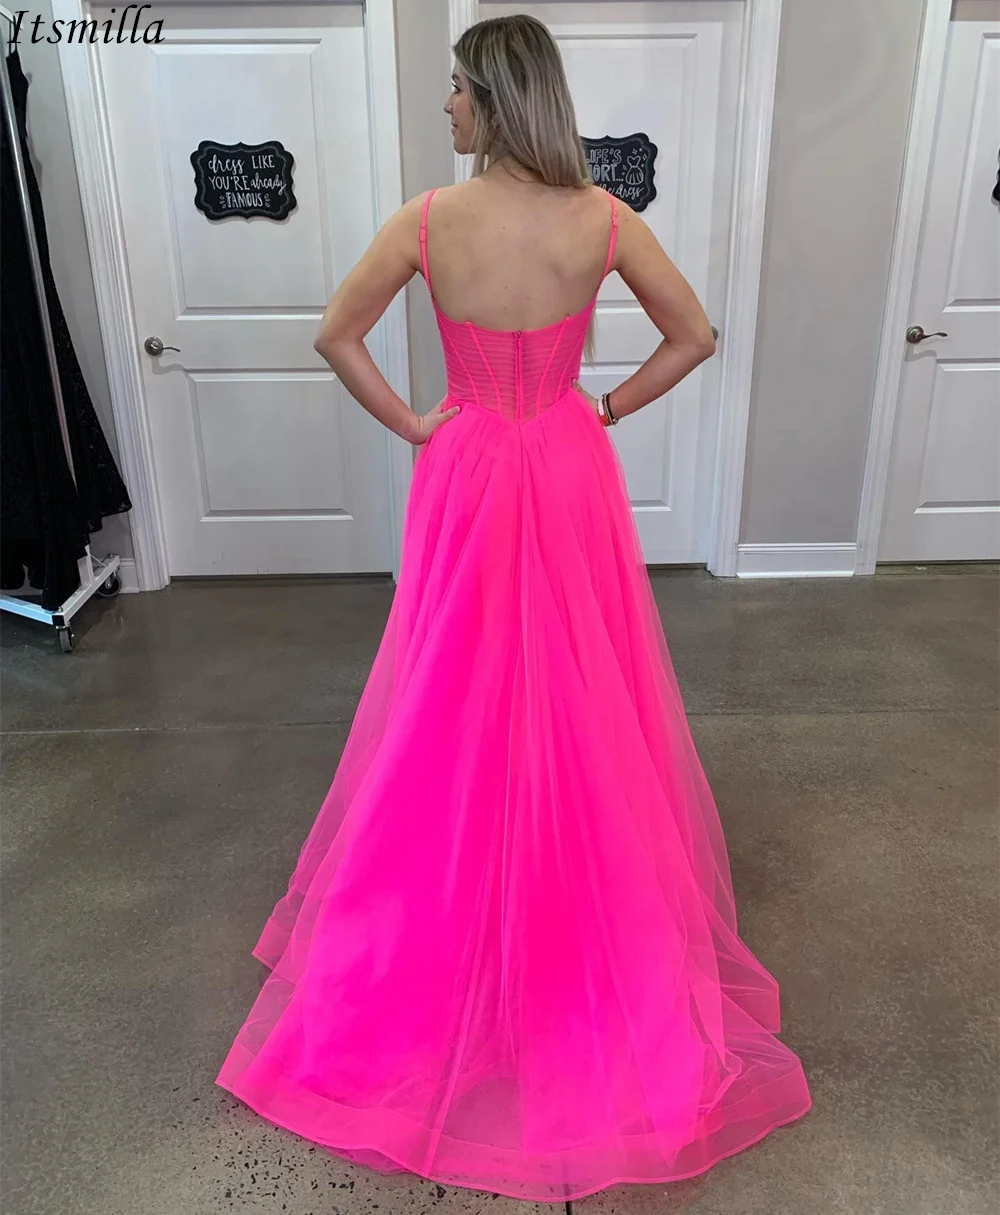 Itsmilla Neon Pink A-line Tulle Prom Evening Dresses with Pockets High Slit  Women Long Formal Party Gowns robe de soirée femme - AliExpress